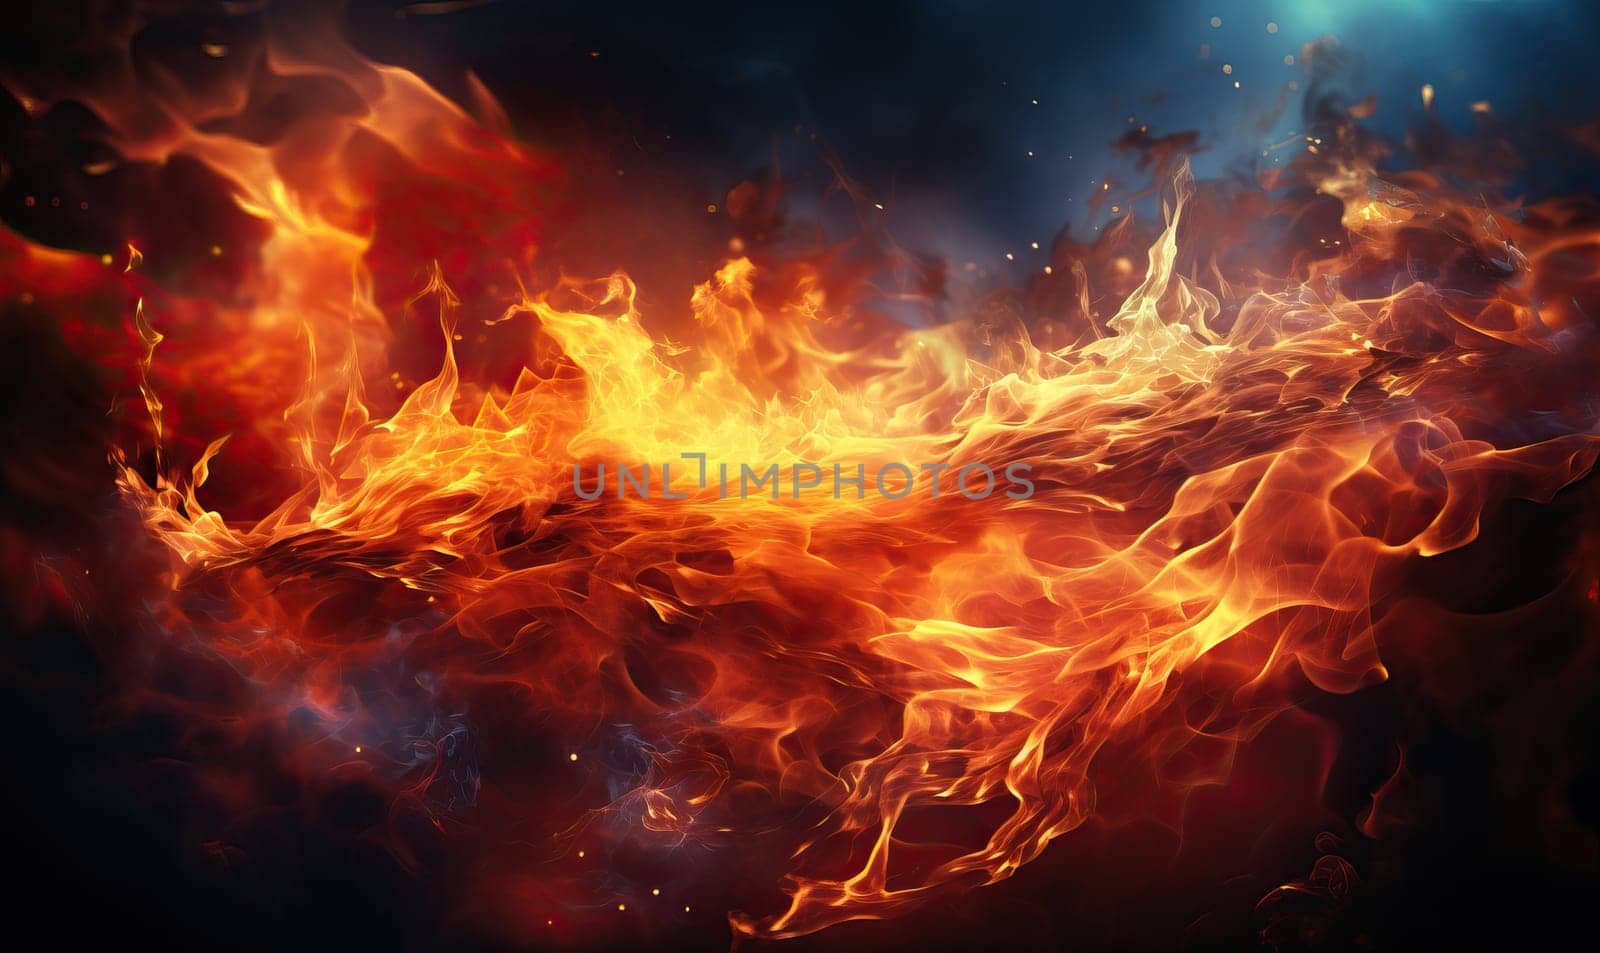 Abstract background with fire effect full frame. Selective soft focus